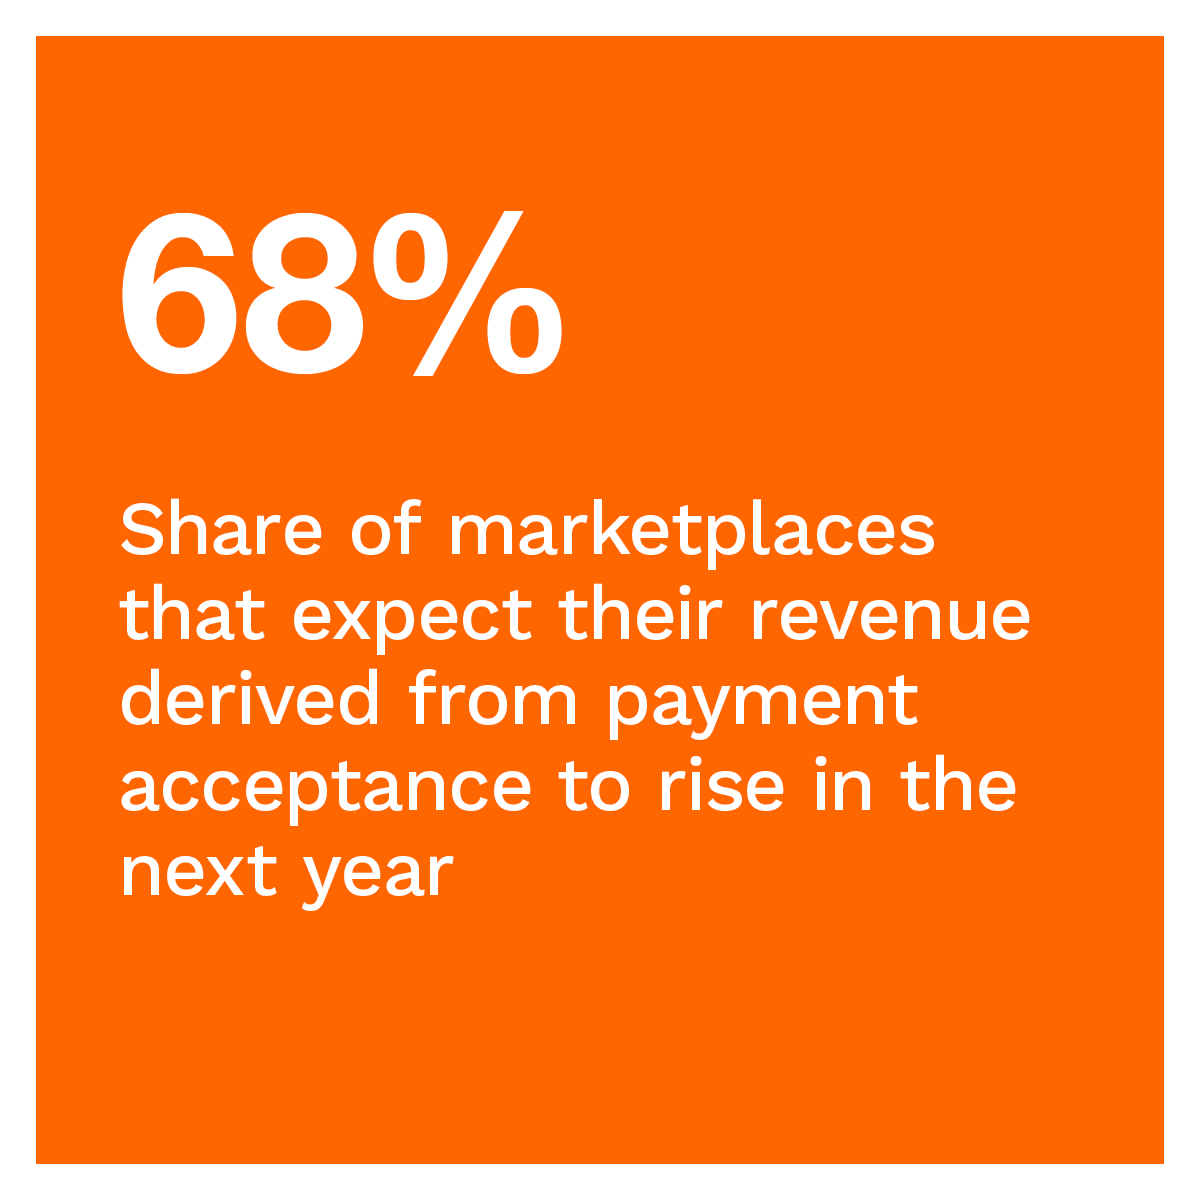 68%: Share of marketplaces that expect their revenue derived from payment acceptance to rise in the next year